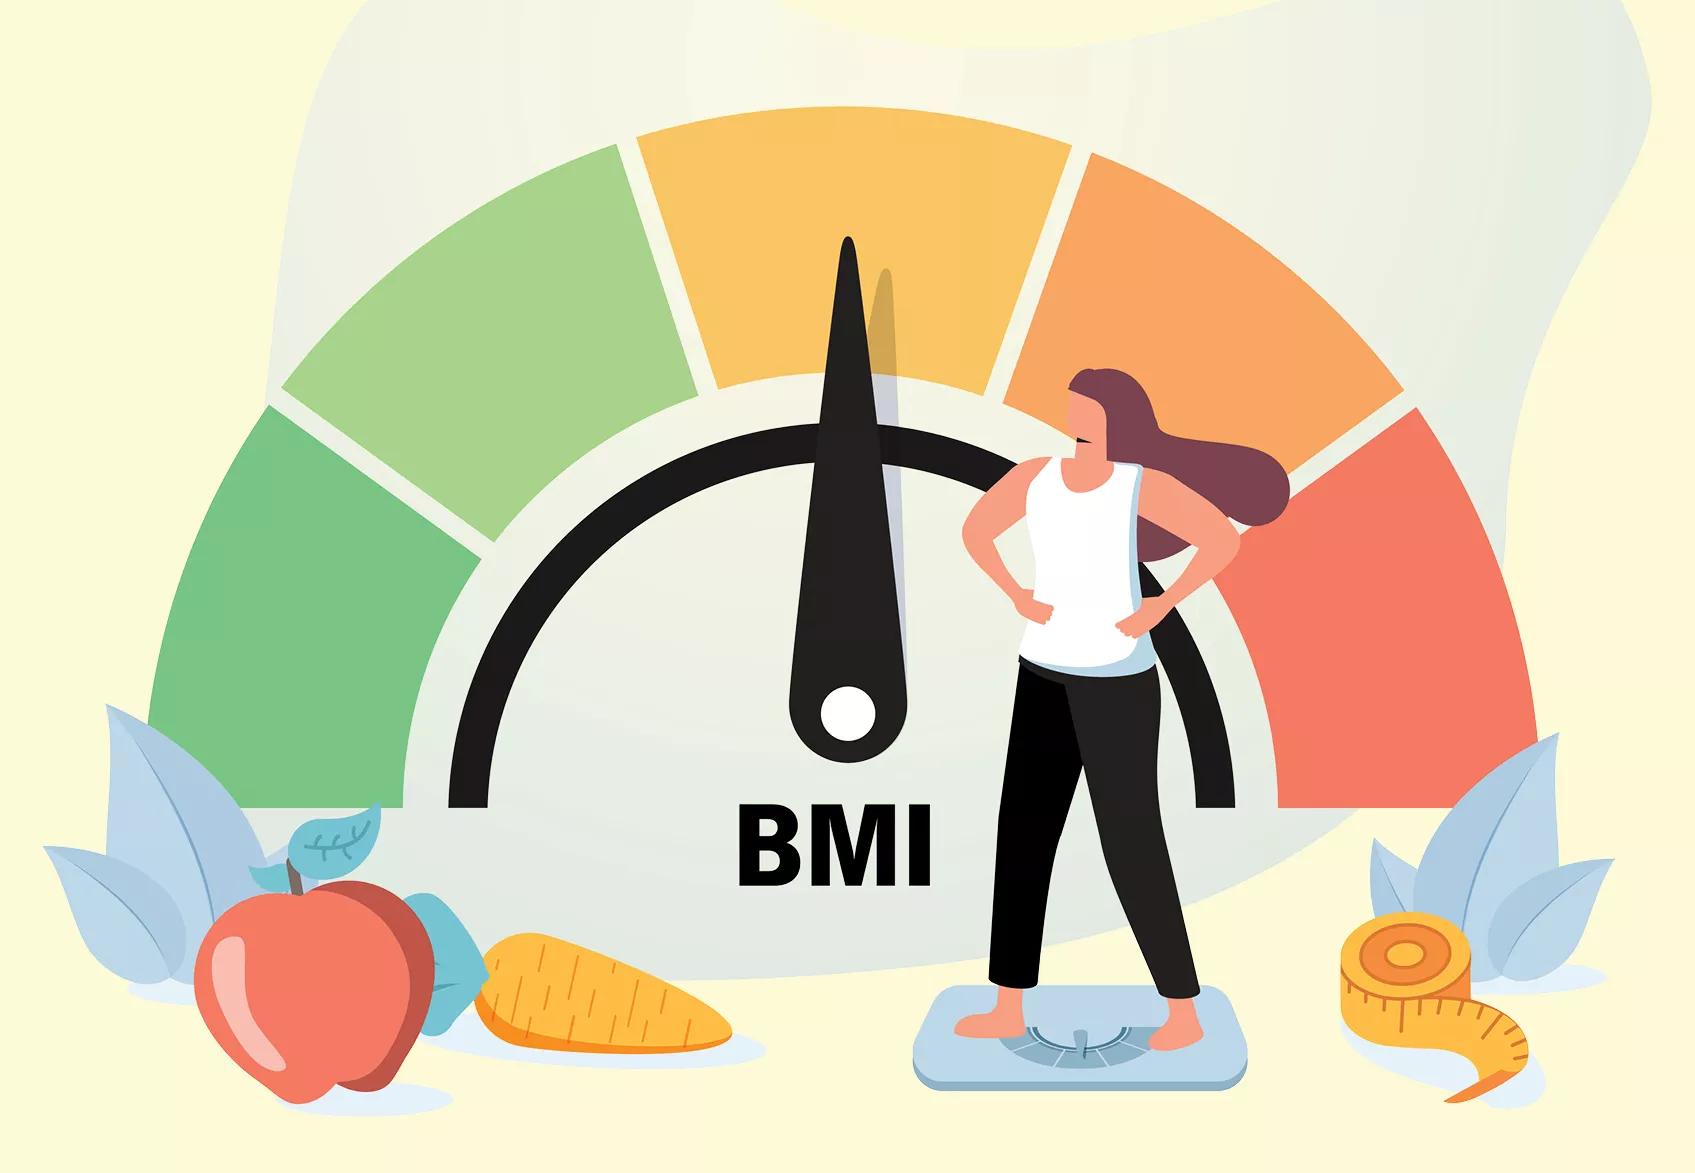 Why your waist size shows your heart risk not your BMI